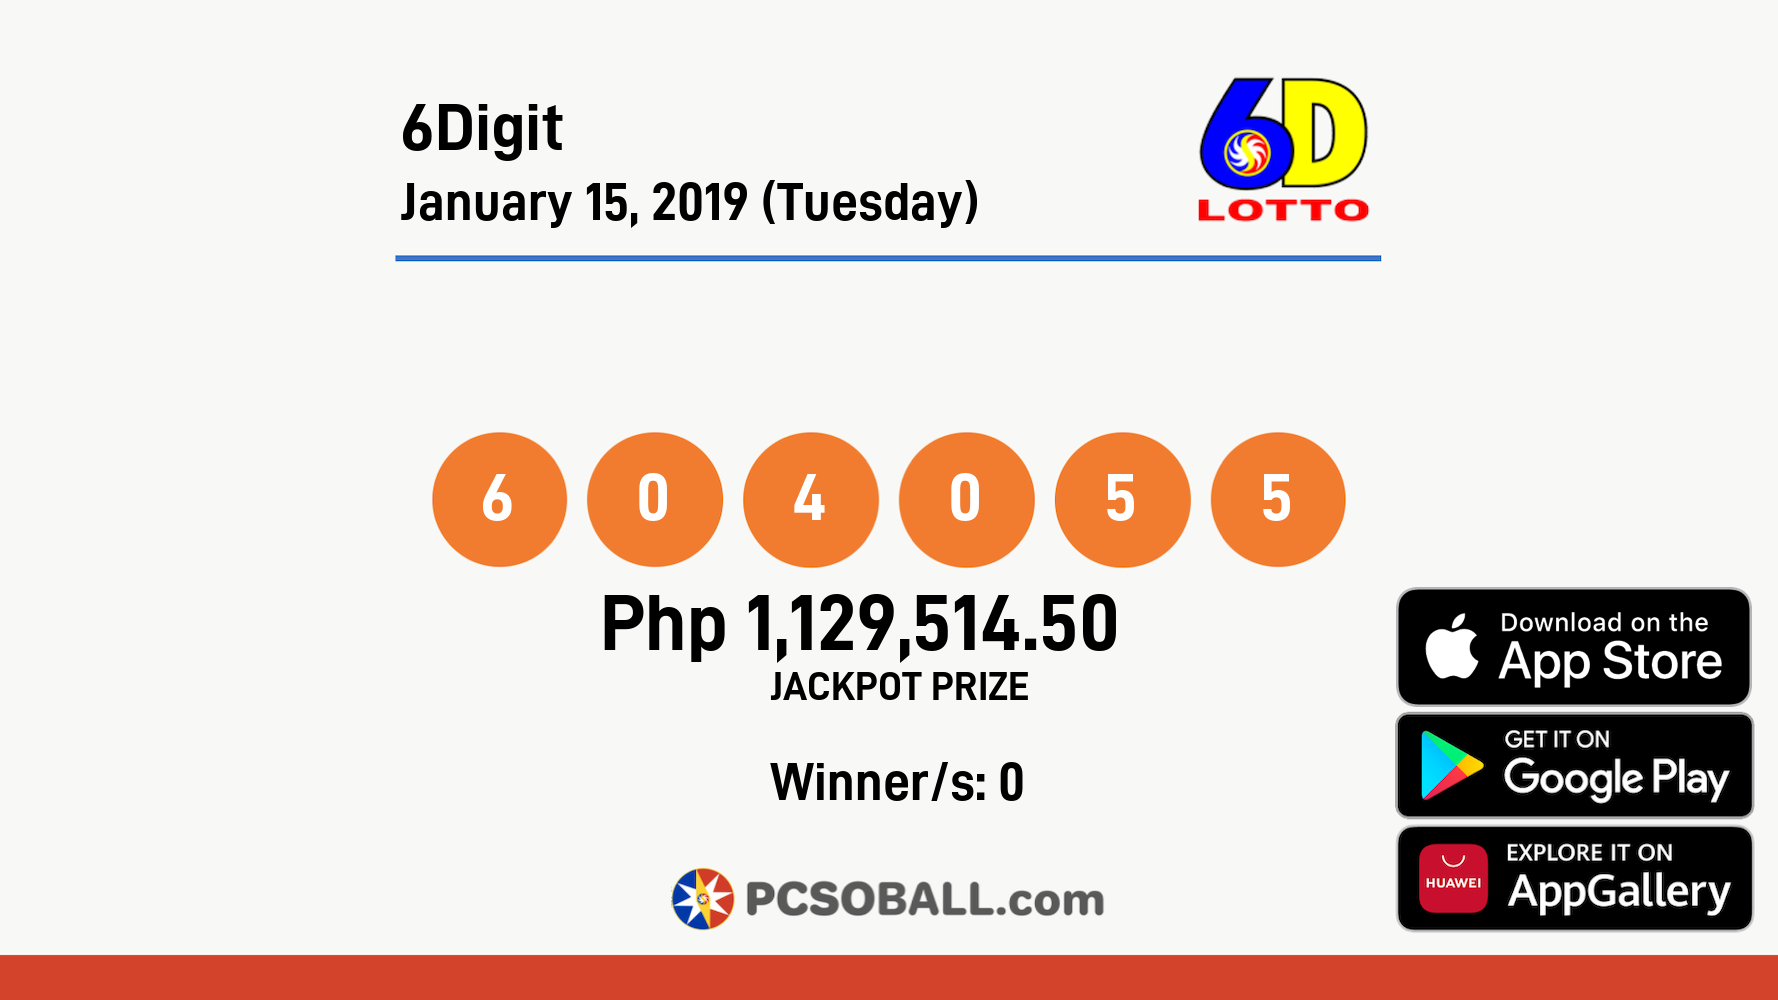 6Digit January 15, 2019 (Tuesday) Result